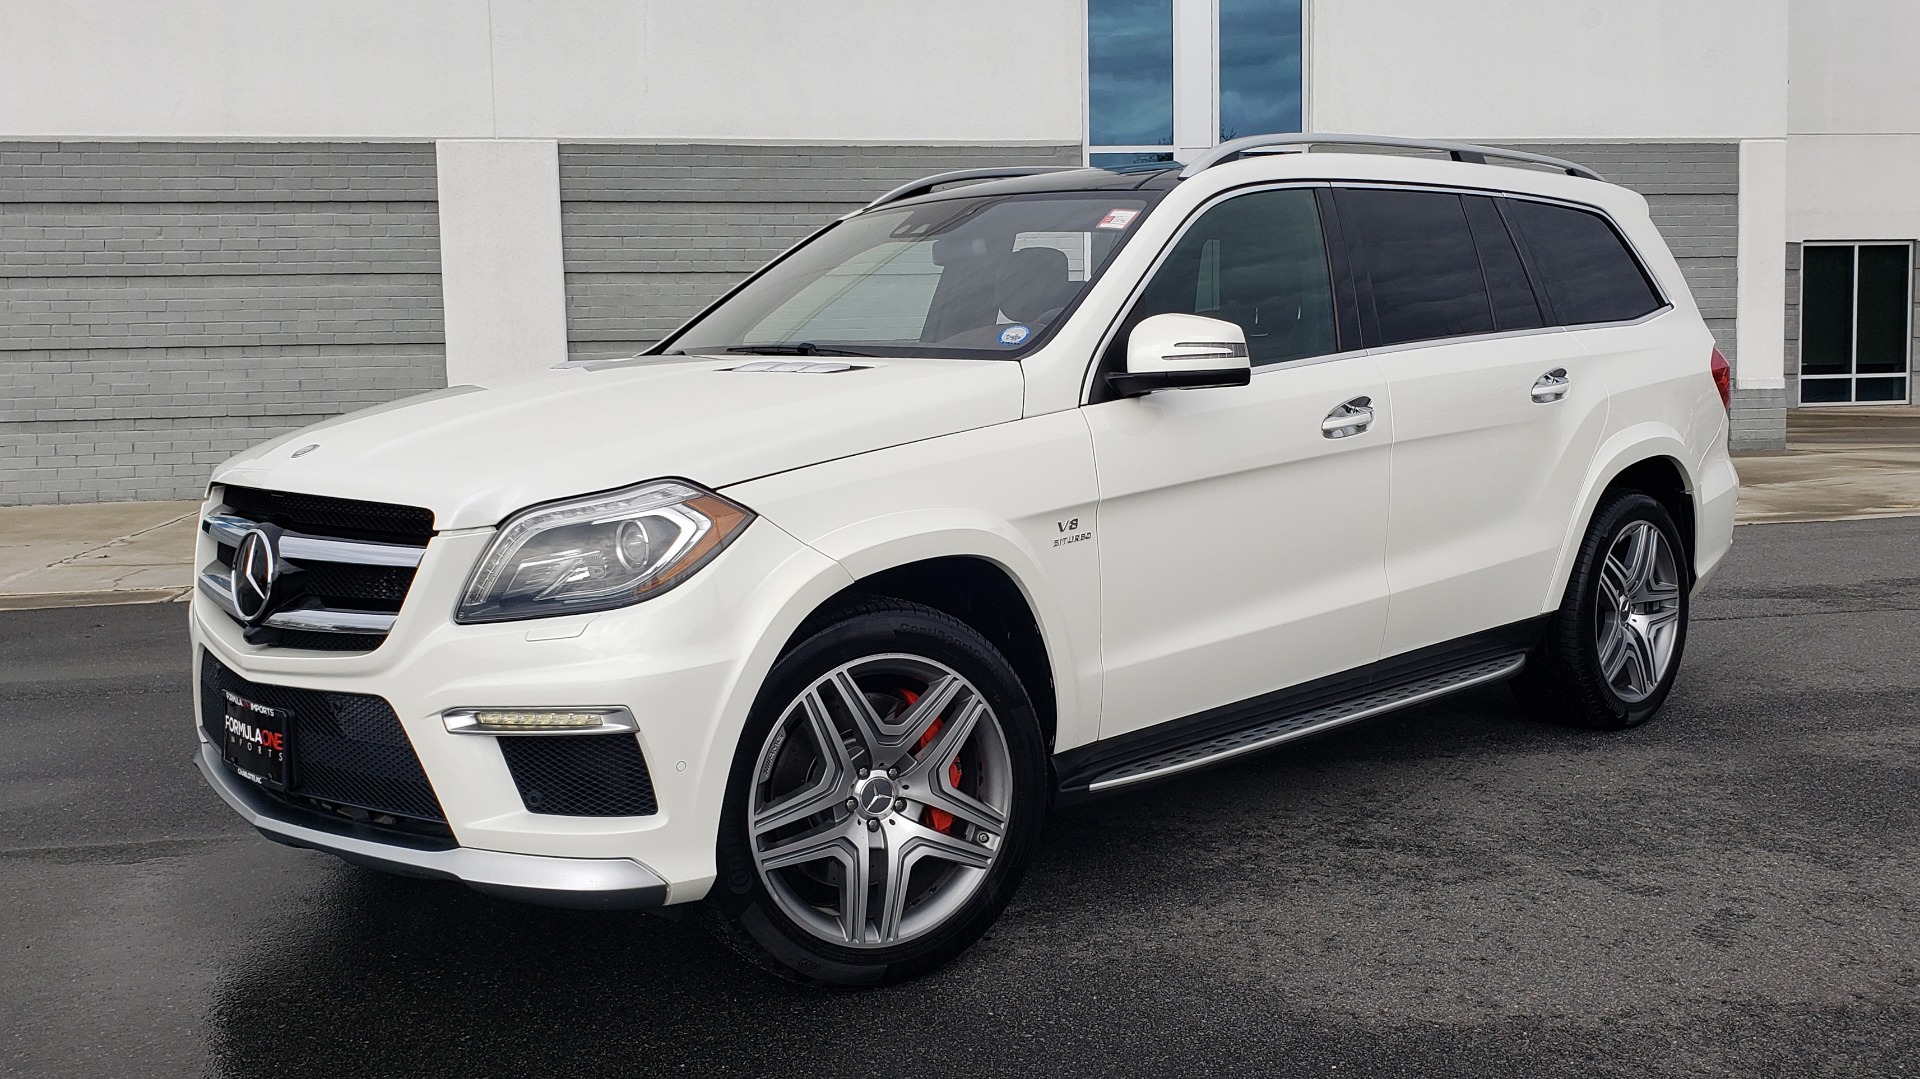 Used 2014 Mercedes-Benz GL-CLASS GL 63 AMG 4MATIC / NIGHT VIEW ASSIST PLUS / BANG & OLUFSEN SND for sale Sold at Formula Imports in Charlotte NC 28227 1